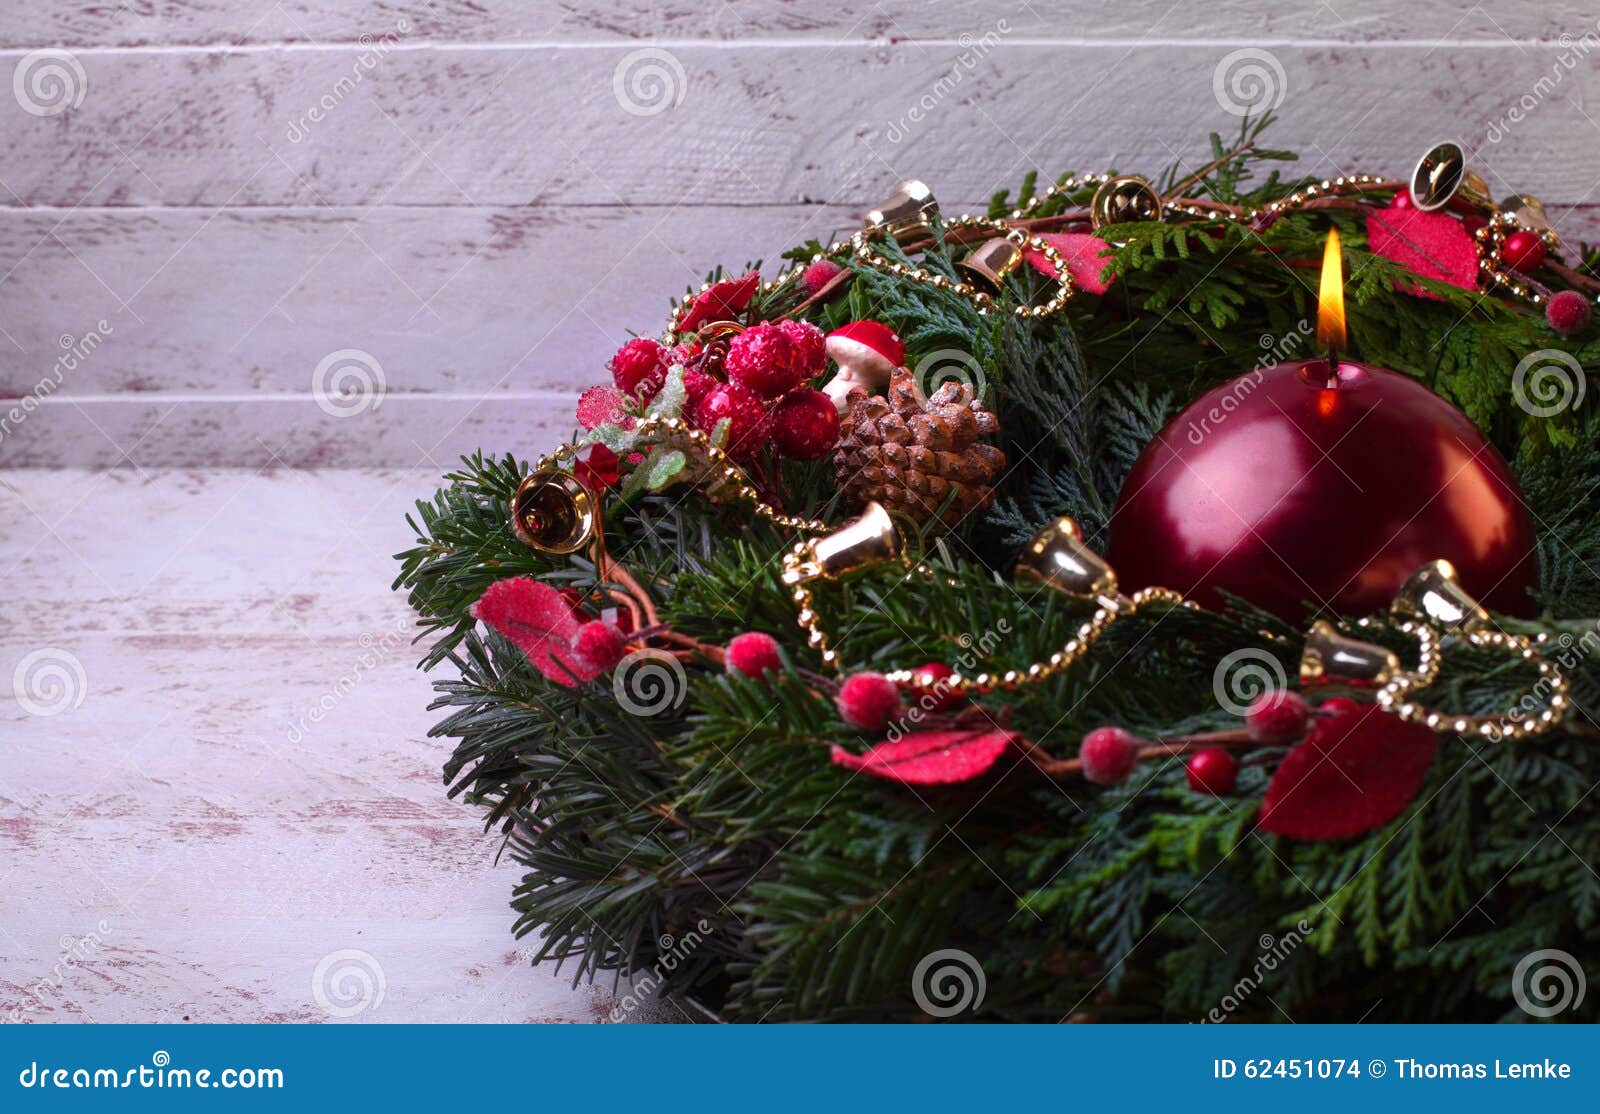 Advent Wreath with a Candle on a White Background Stock Photo - Image ...